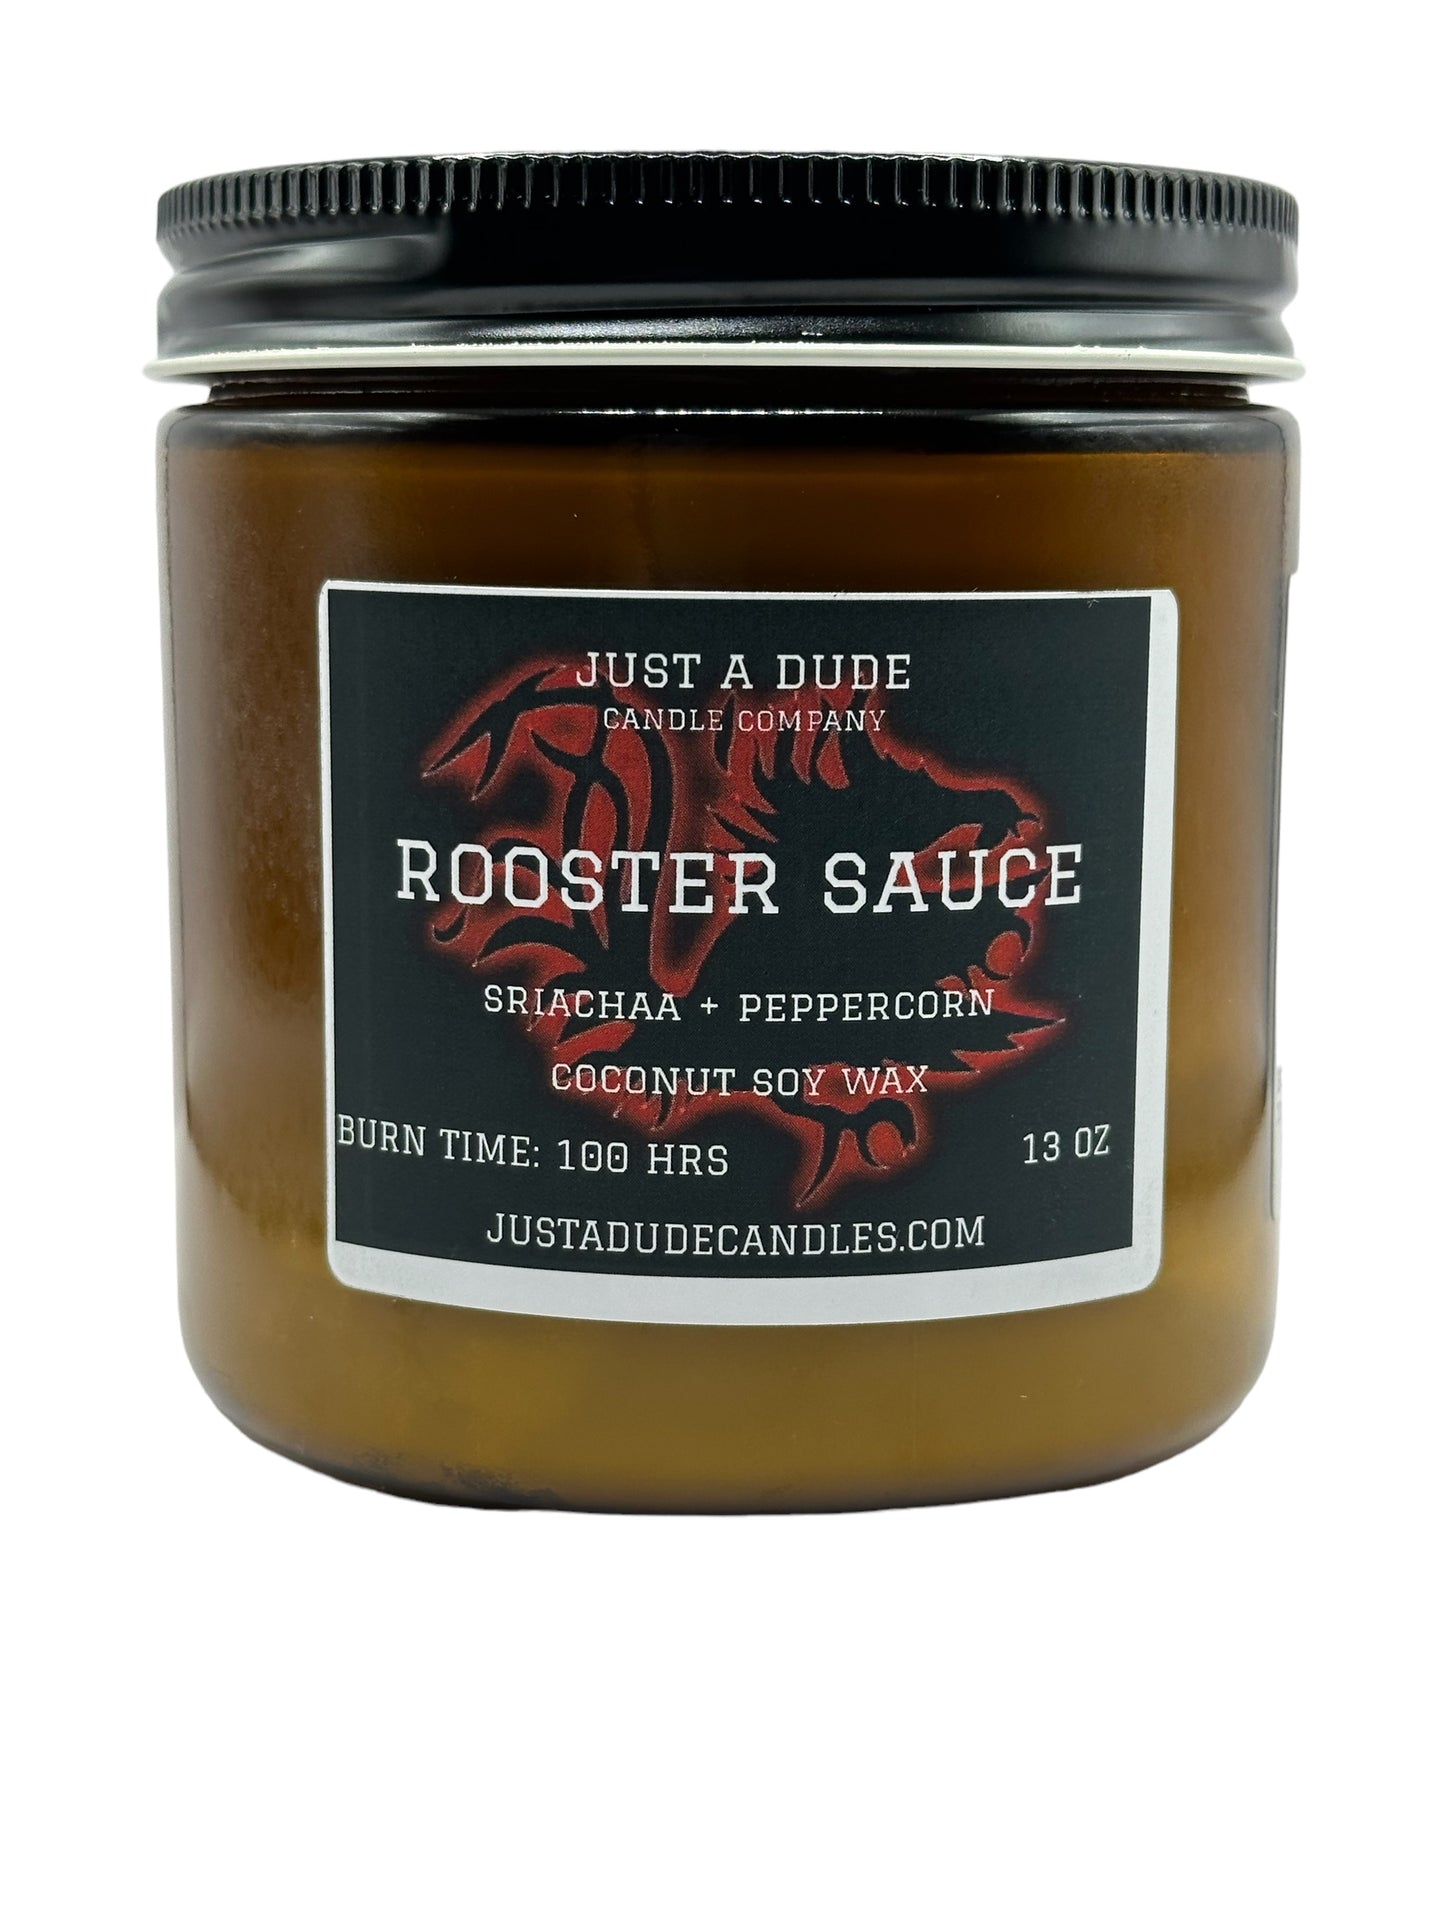 ROOSTER SAUCE (SRIACHA + PEPPERCORN) AMBER JAR COLLECTION